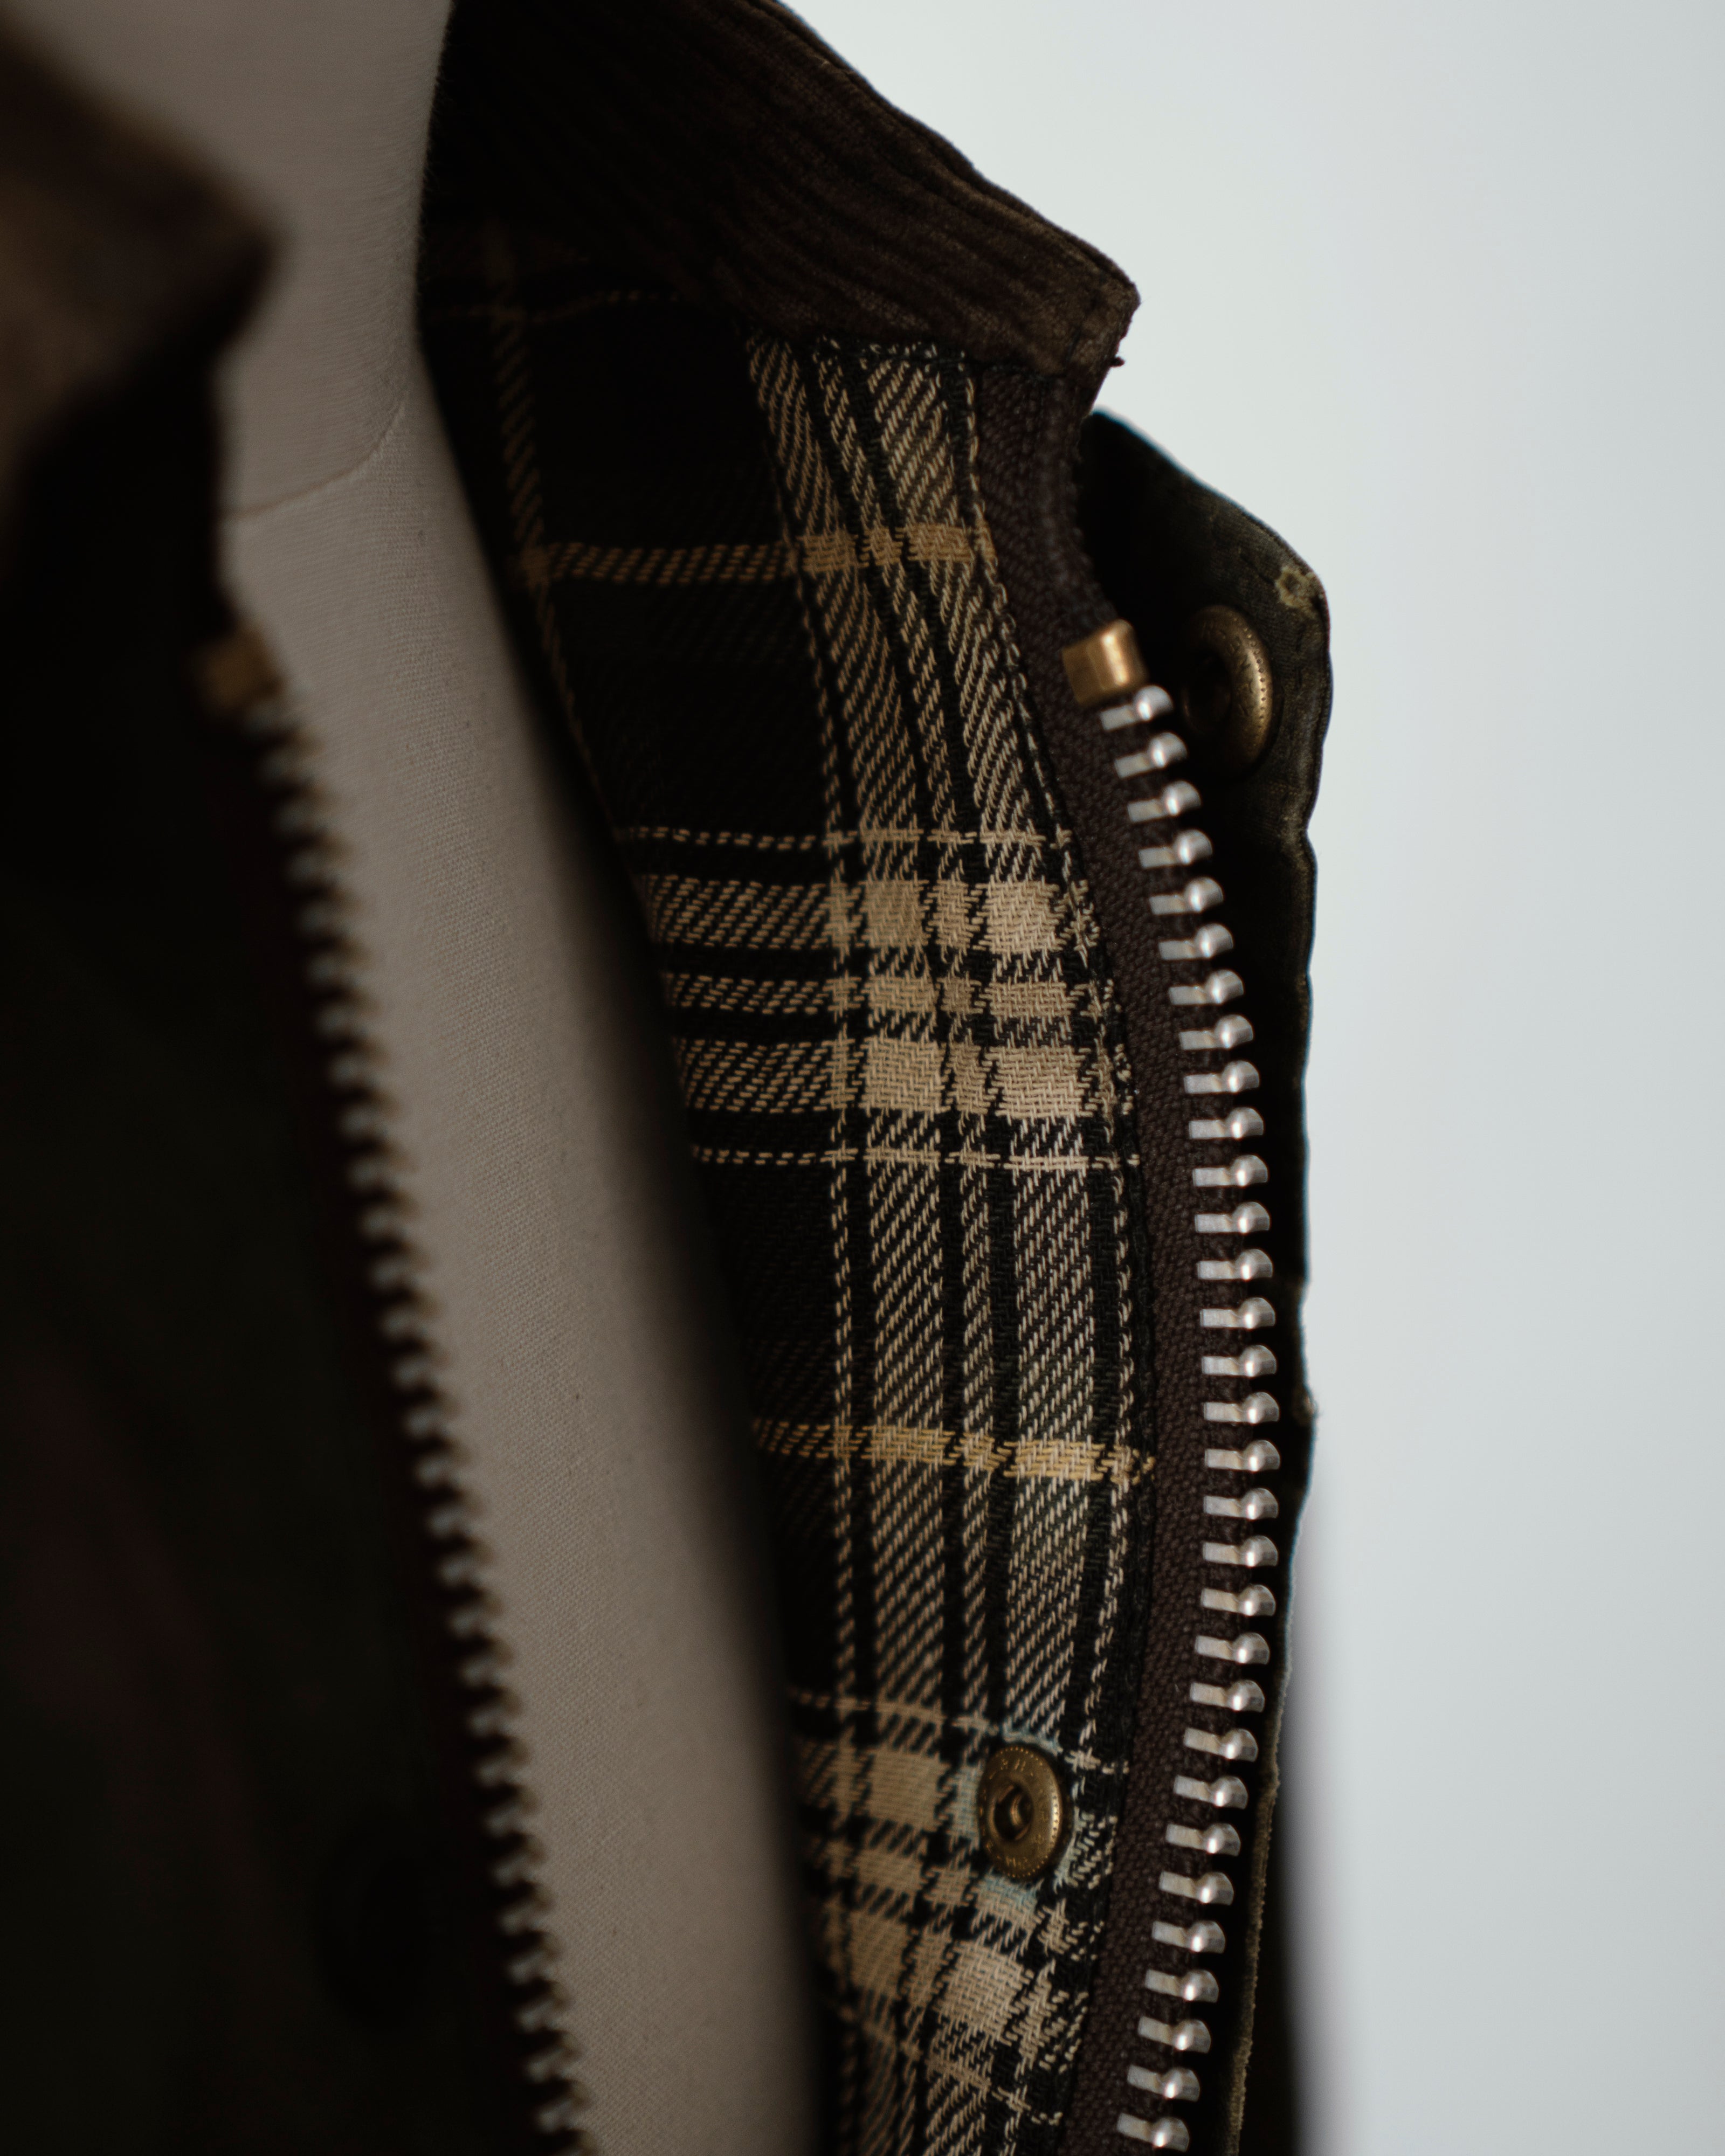 Recrafted Two-Tone Hunting Jacket | Barbour Bedale